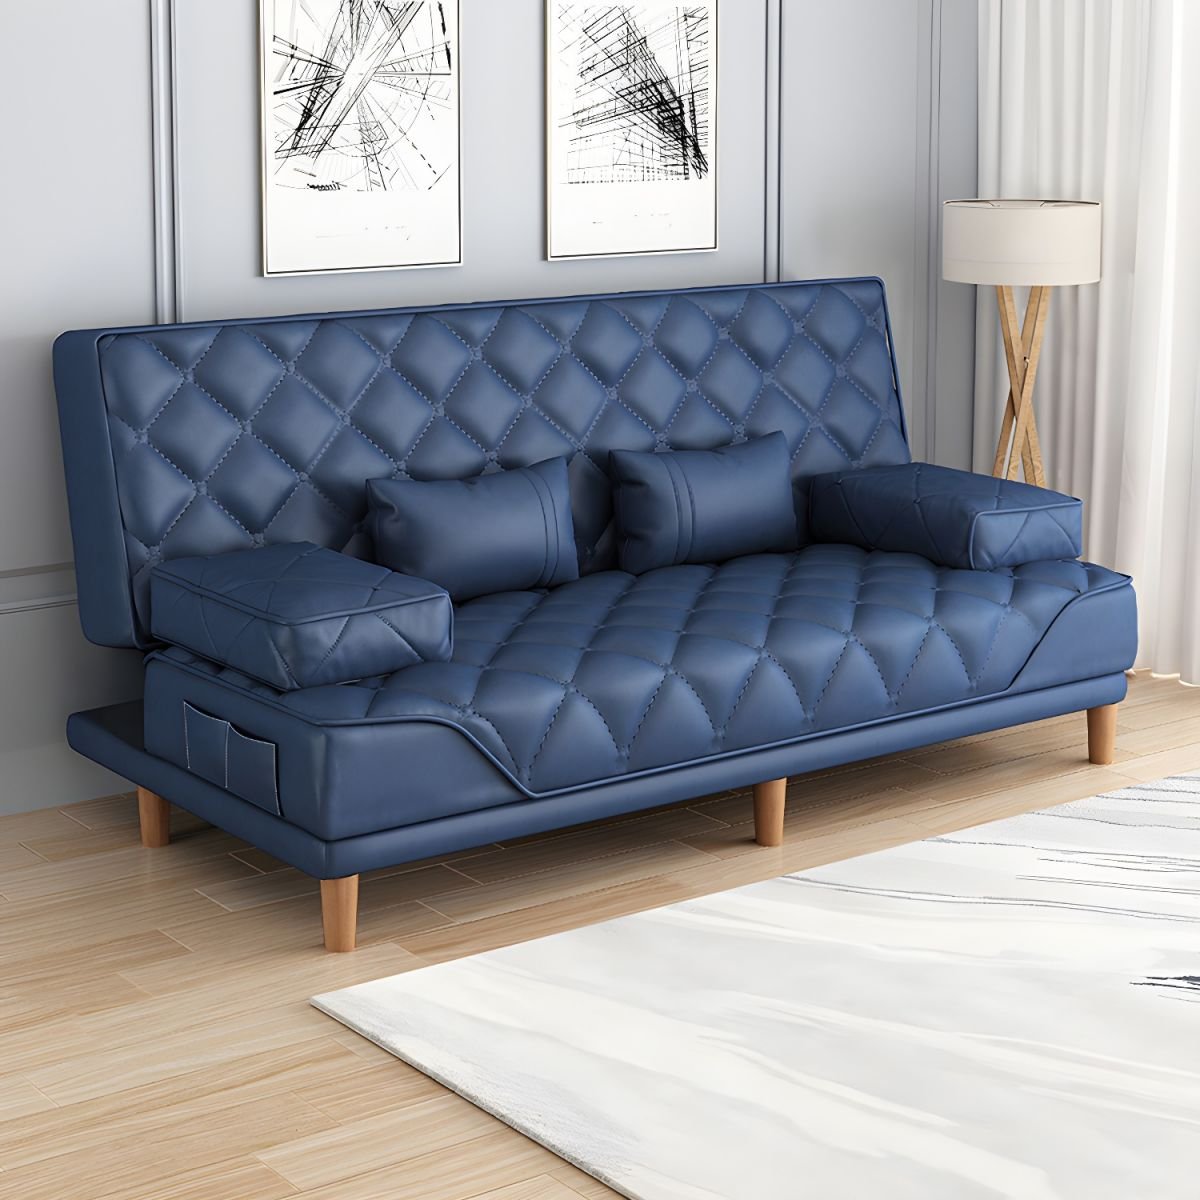 Contemporary Tight Back Convertible Sofa and Chaise with Pillow Top Arm - 47"L x 30"W x 34"H Dark Blue Tech Cloth